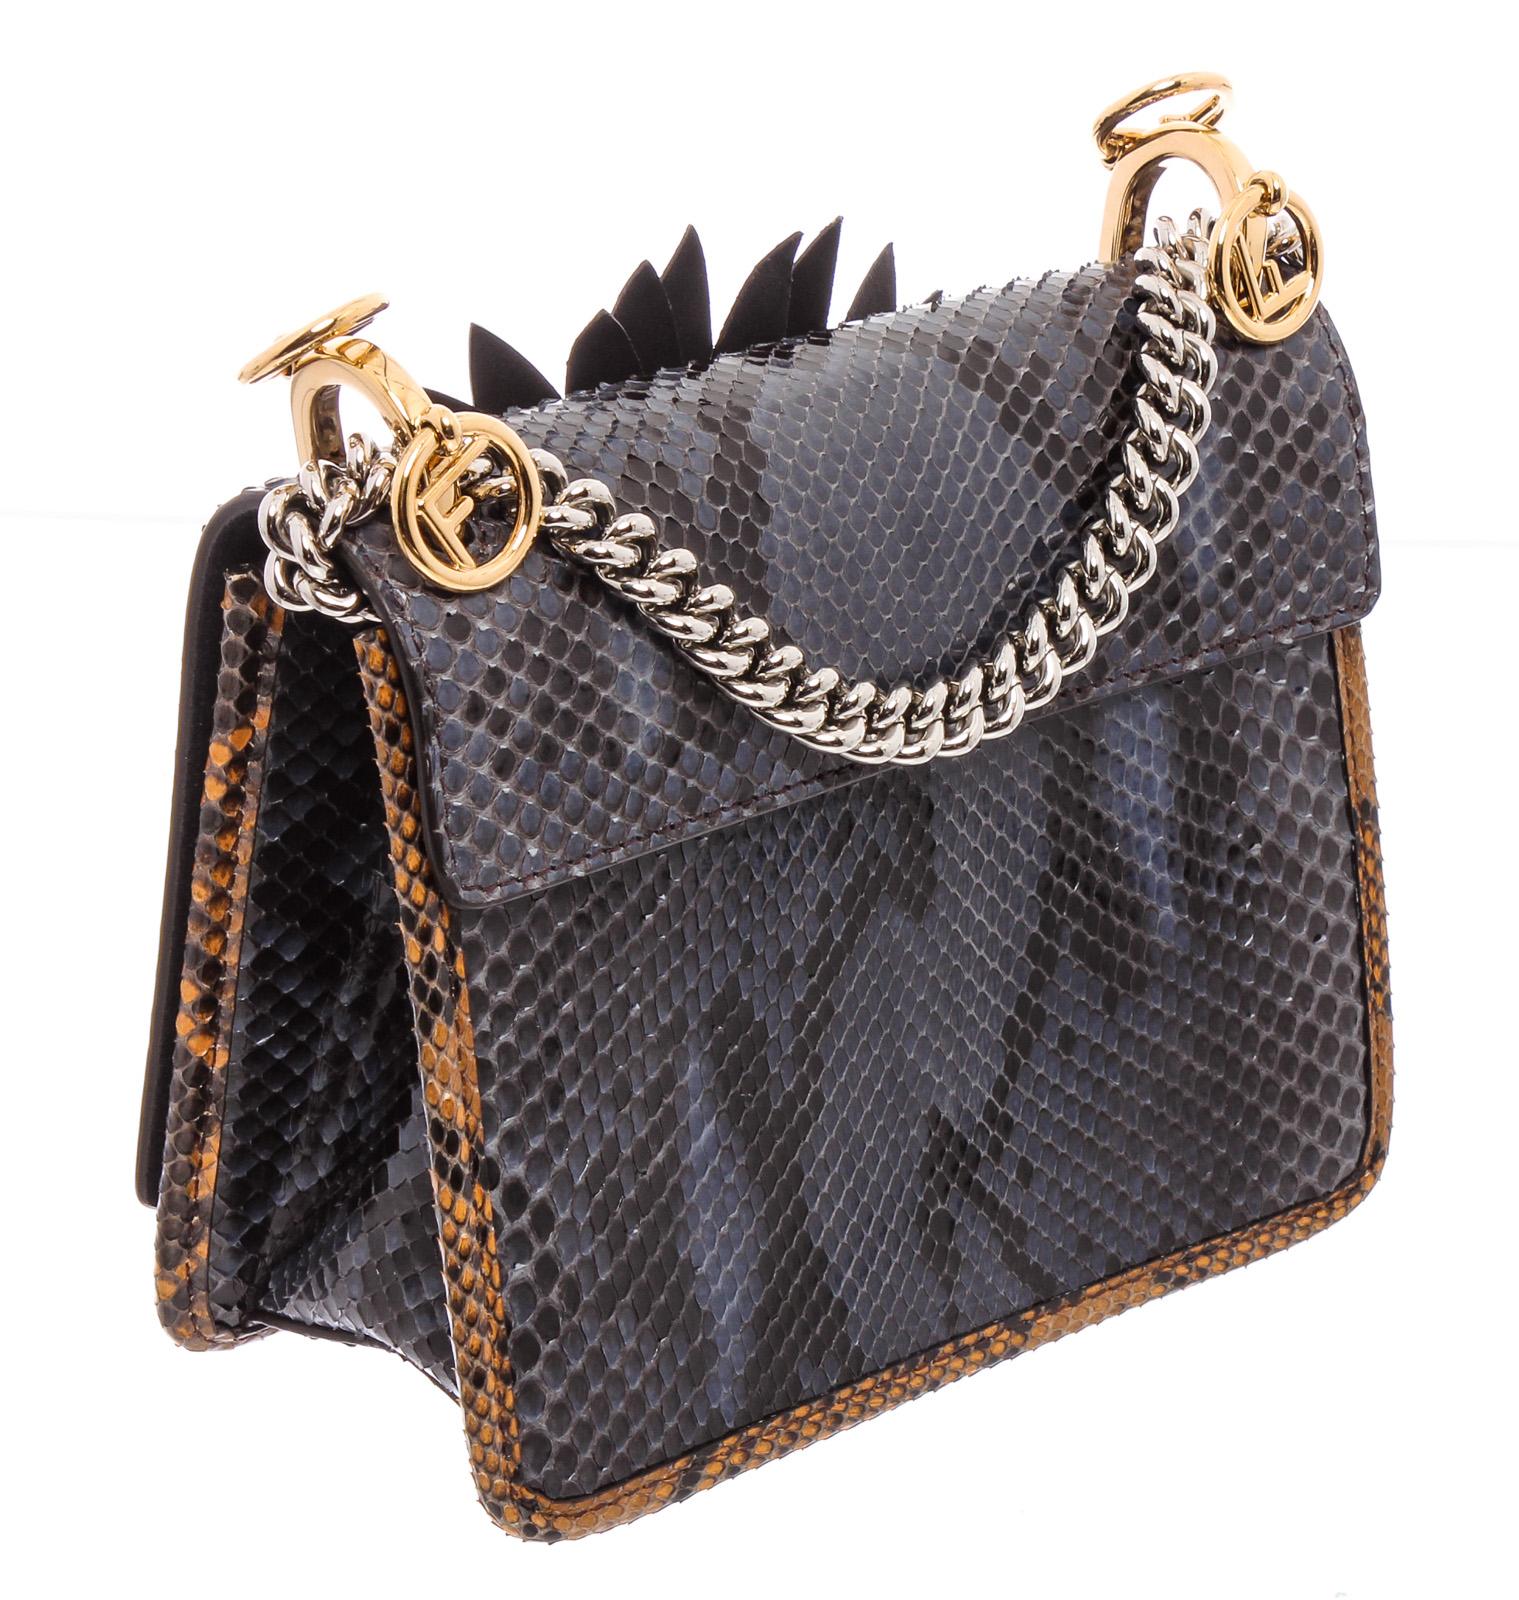 Black snakeskin Fendi Kan I micro bag with gold-tone hardware, narrow shoulder strap, brown and multicolor snakeskin floral appliqué at front featuring logo adornment, tonal suede interior, single slit pocket at interior and dual magnetic snap